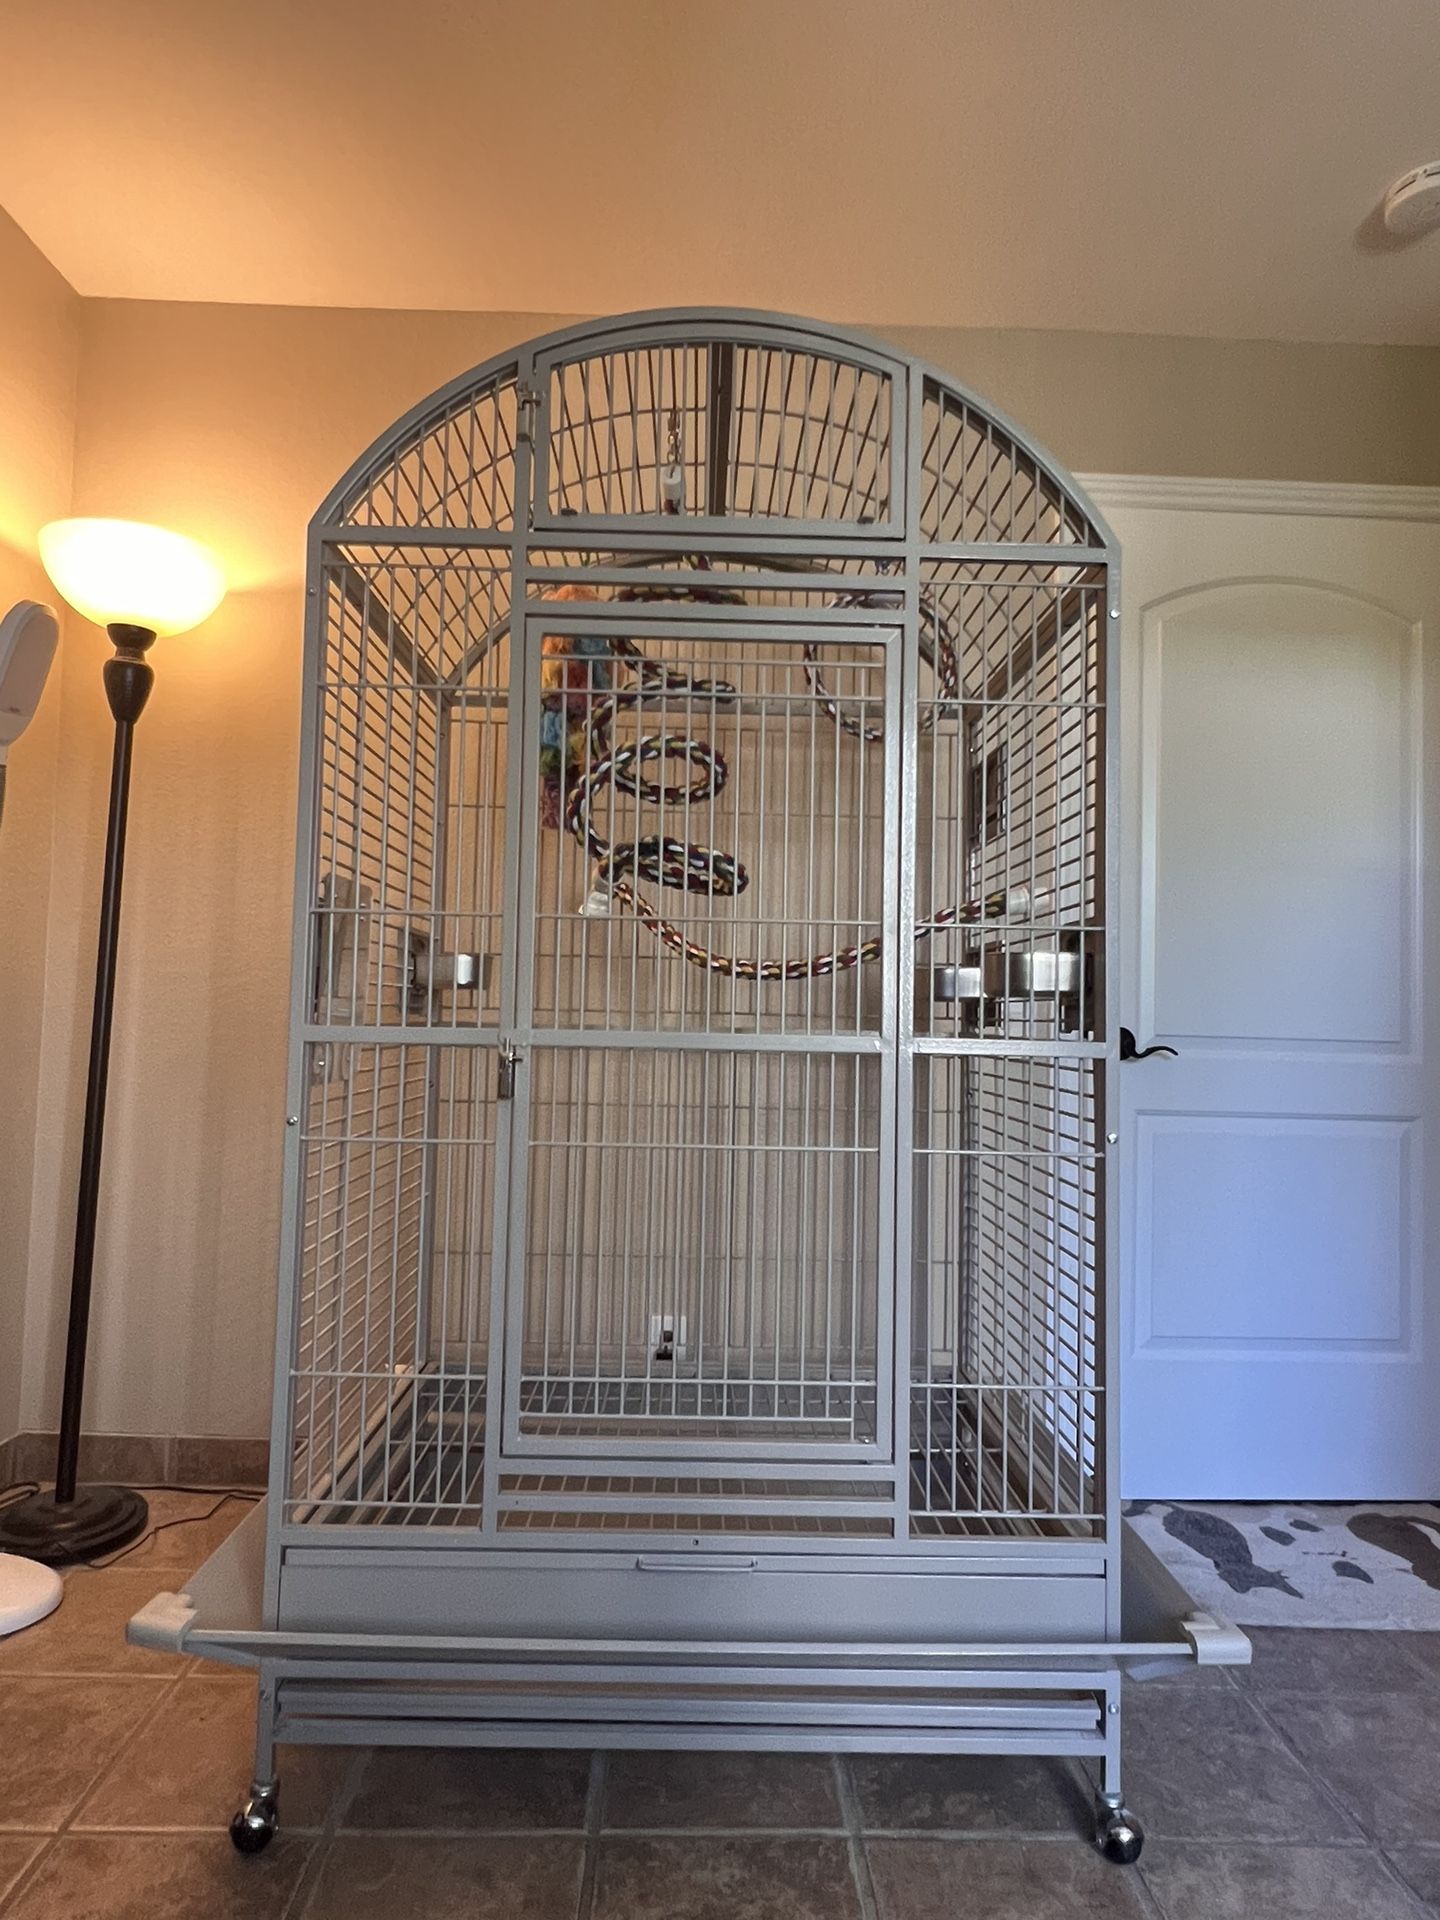 King’s Cages Bird Cage 73” Tall With veranda